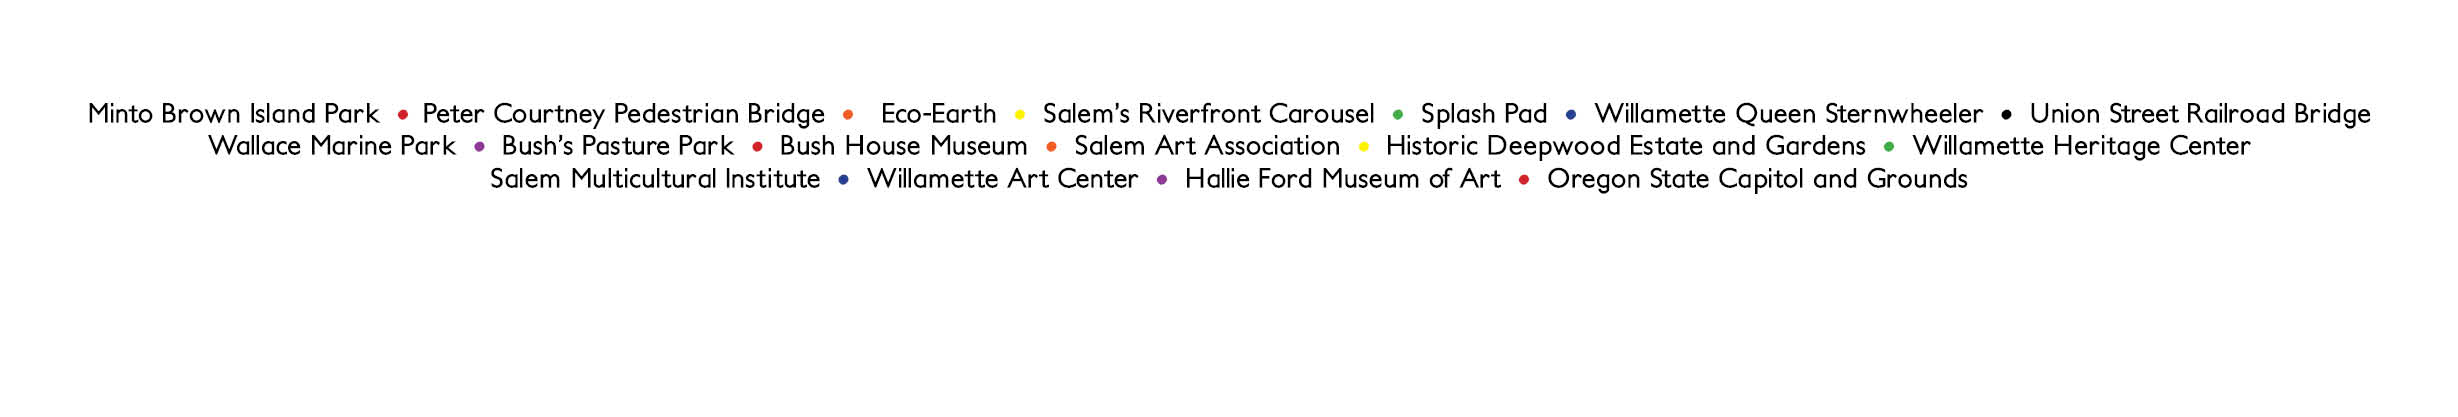 List of places to go in Salem